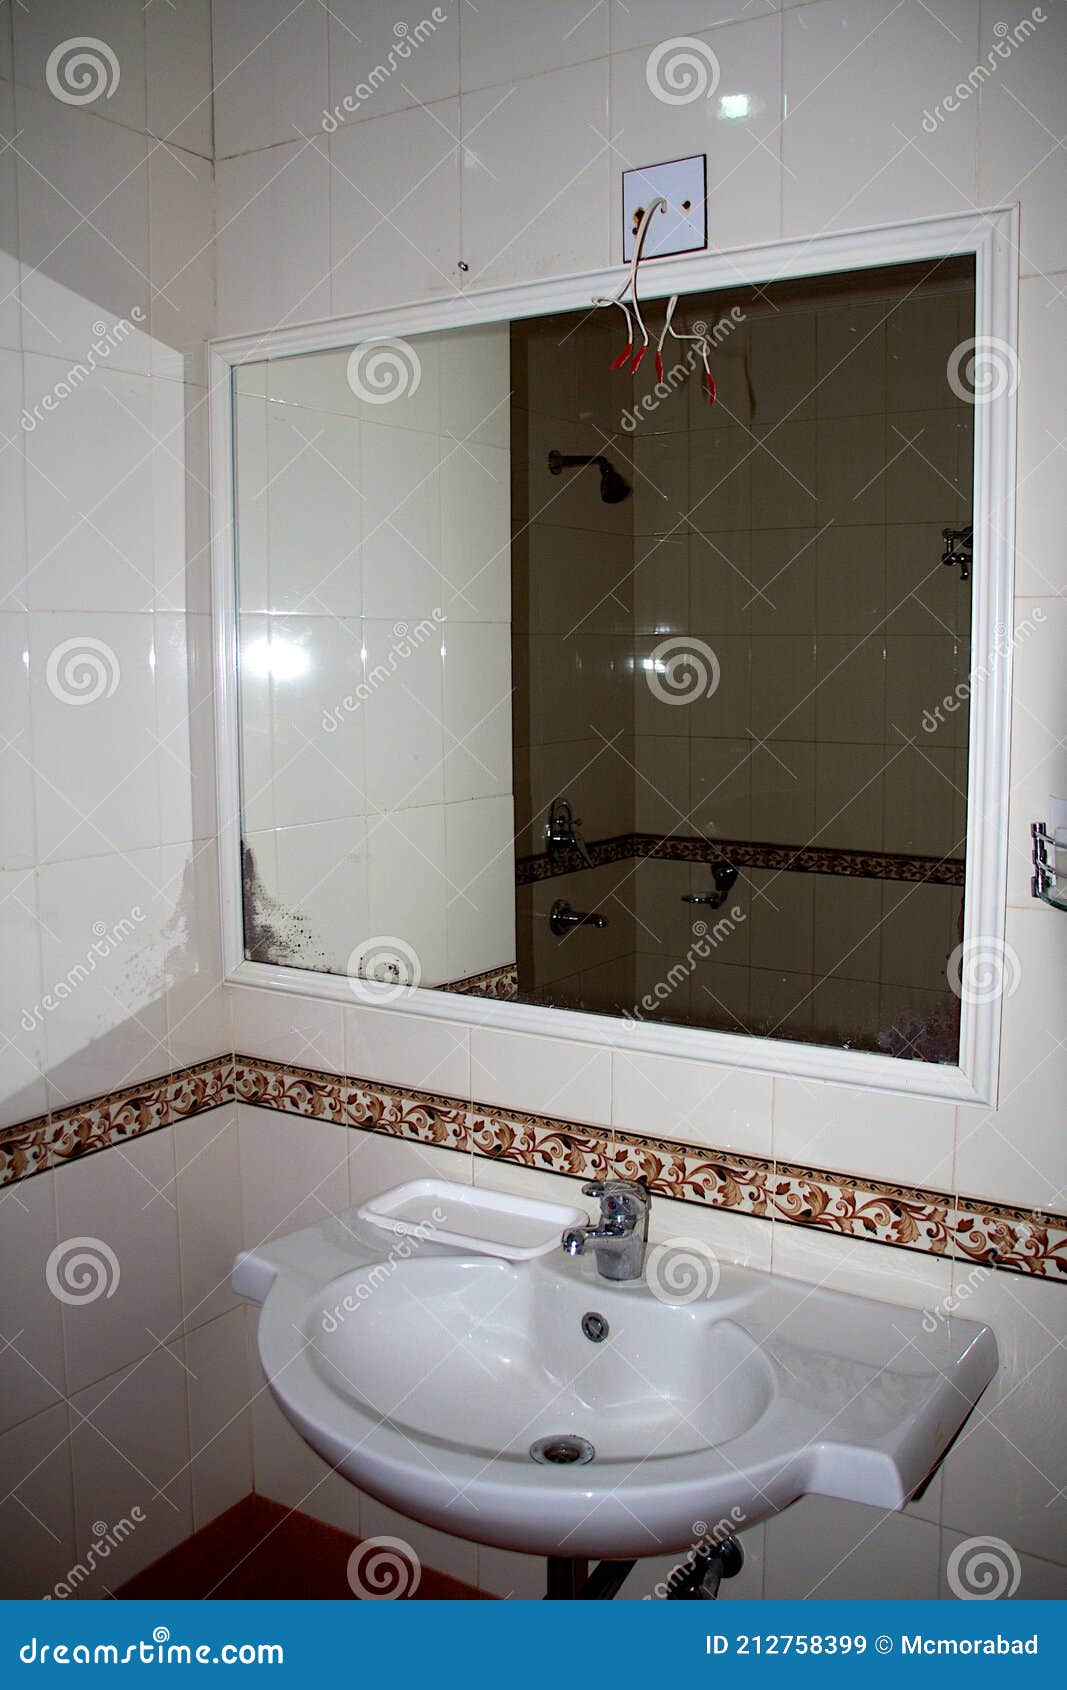 Wash Basin and Mirror in Wash-room Stock Image - Image of ...